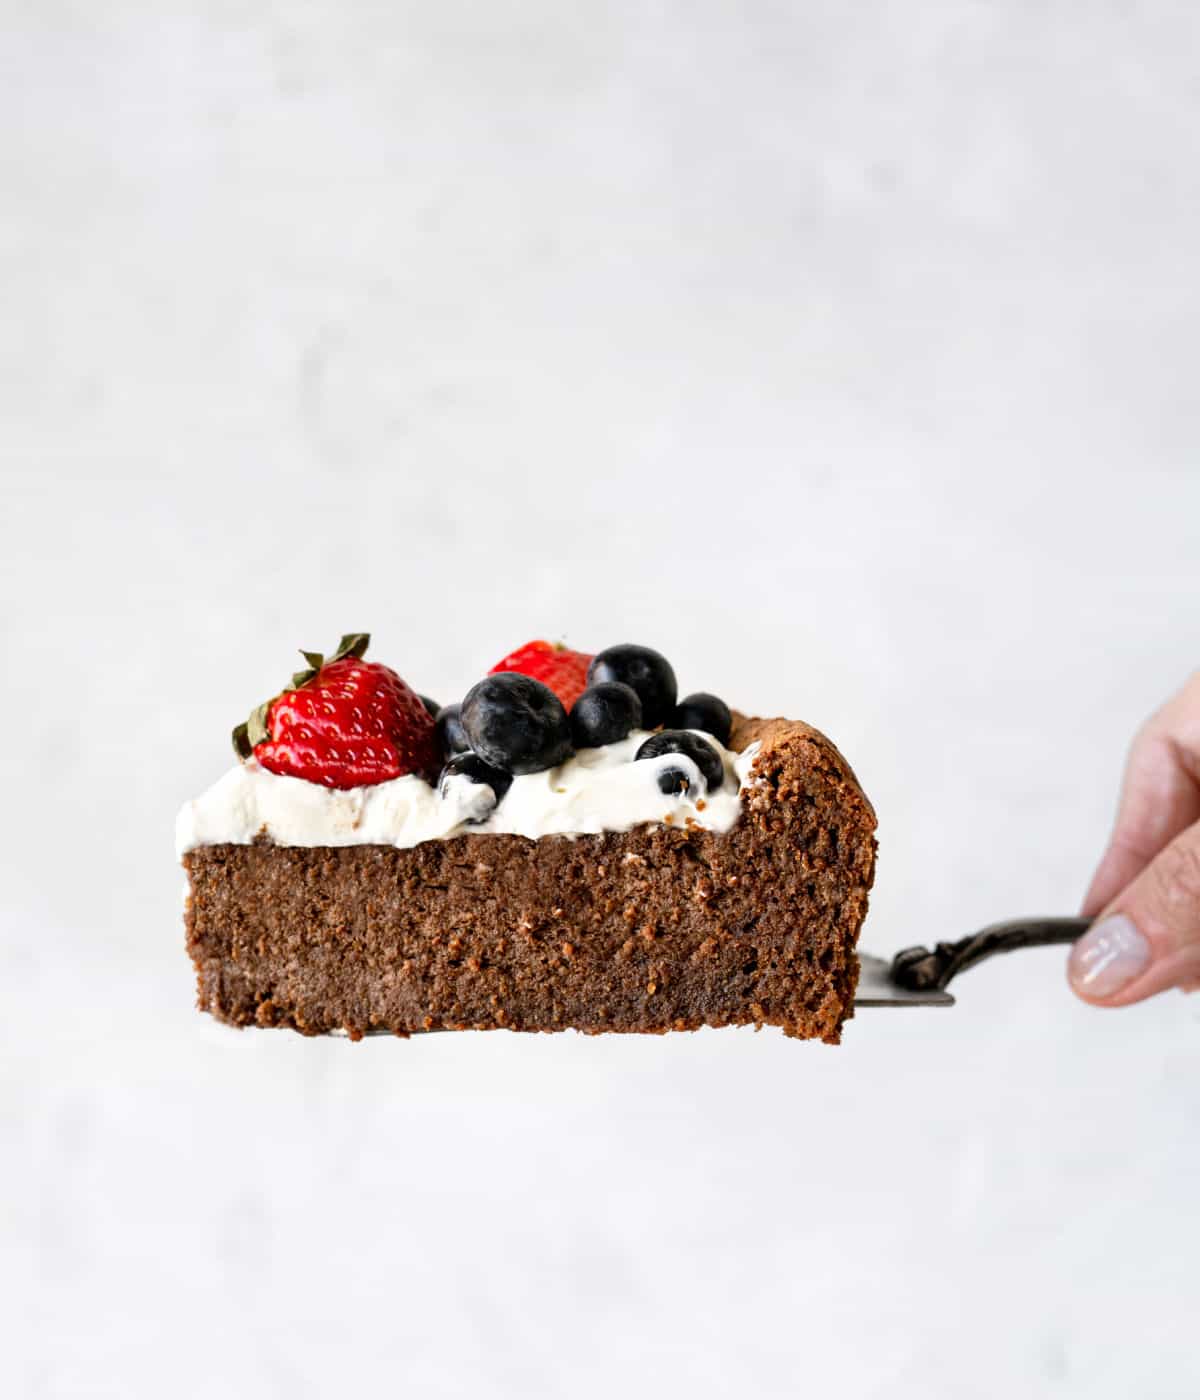 Single slice of cream and berry covered chocolate torte on a cake serves. Grey background. 